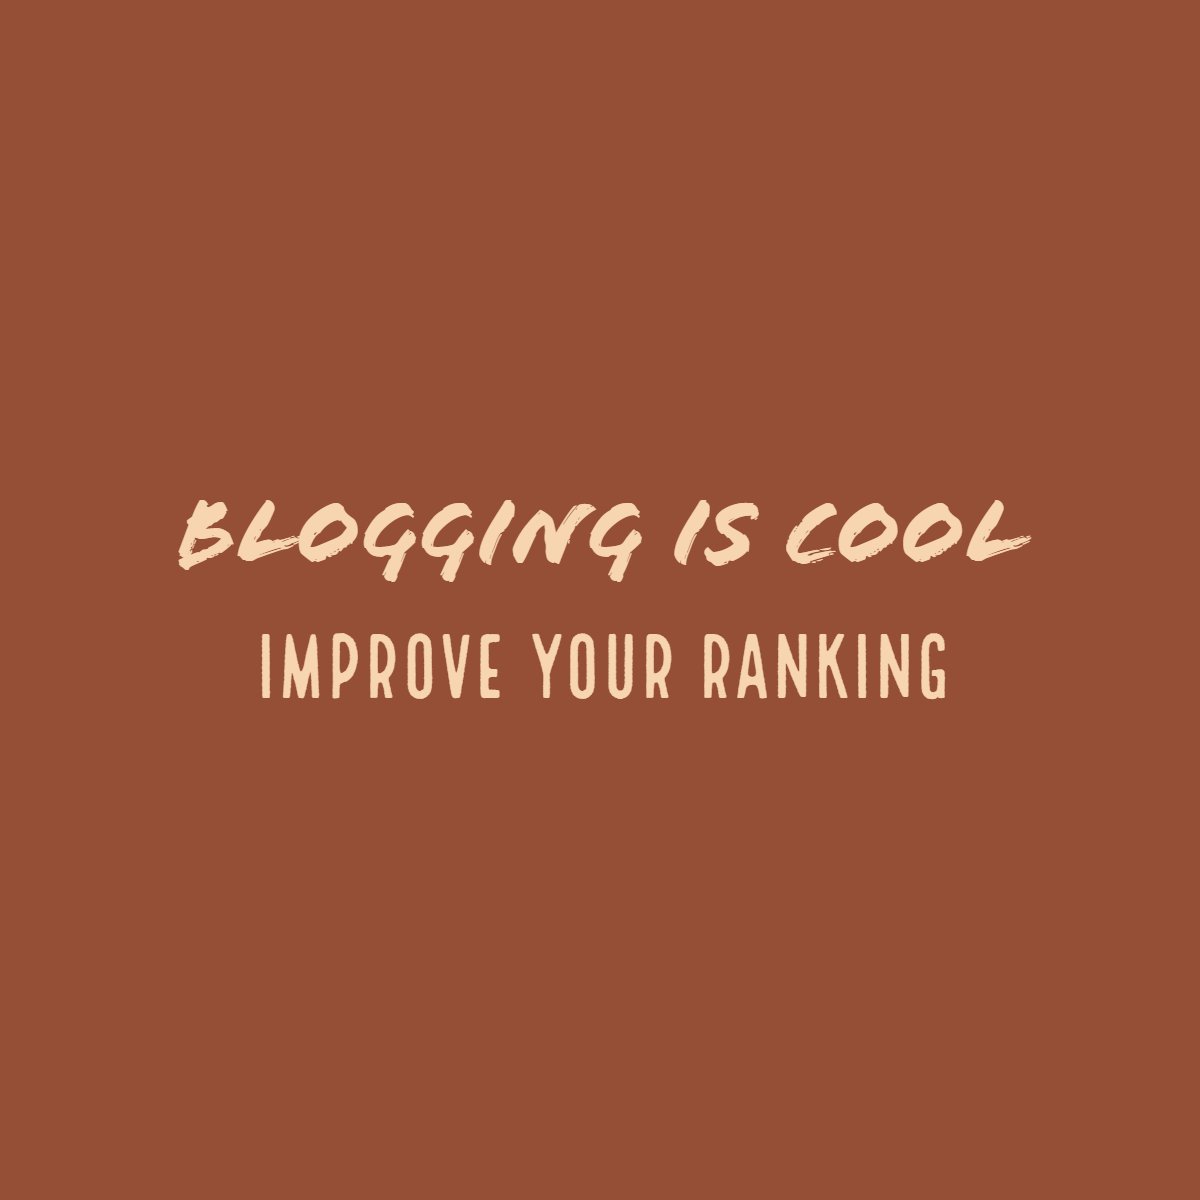 Bloggingiscool.com aims to help new bloggers learn